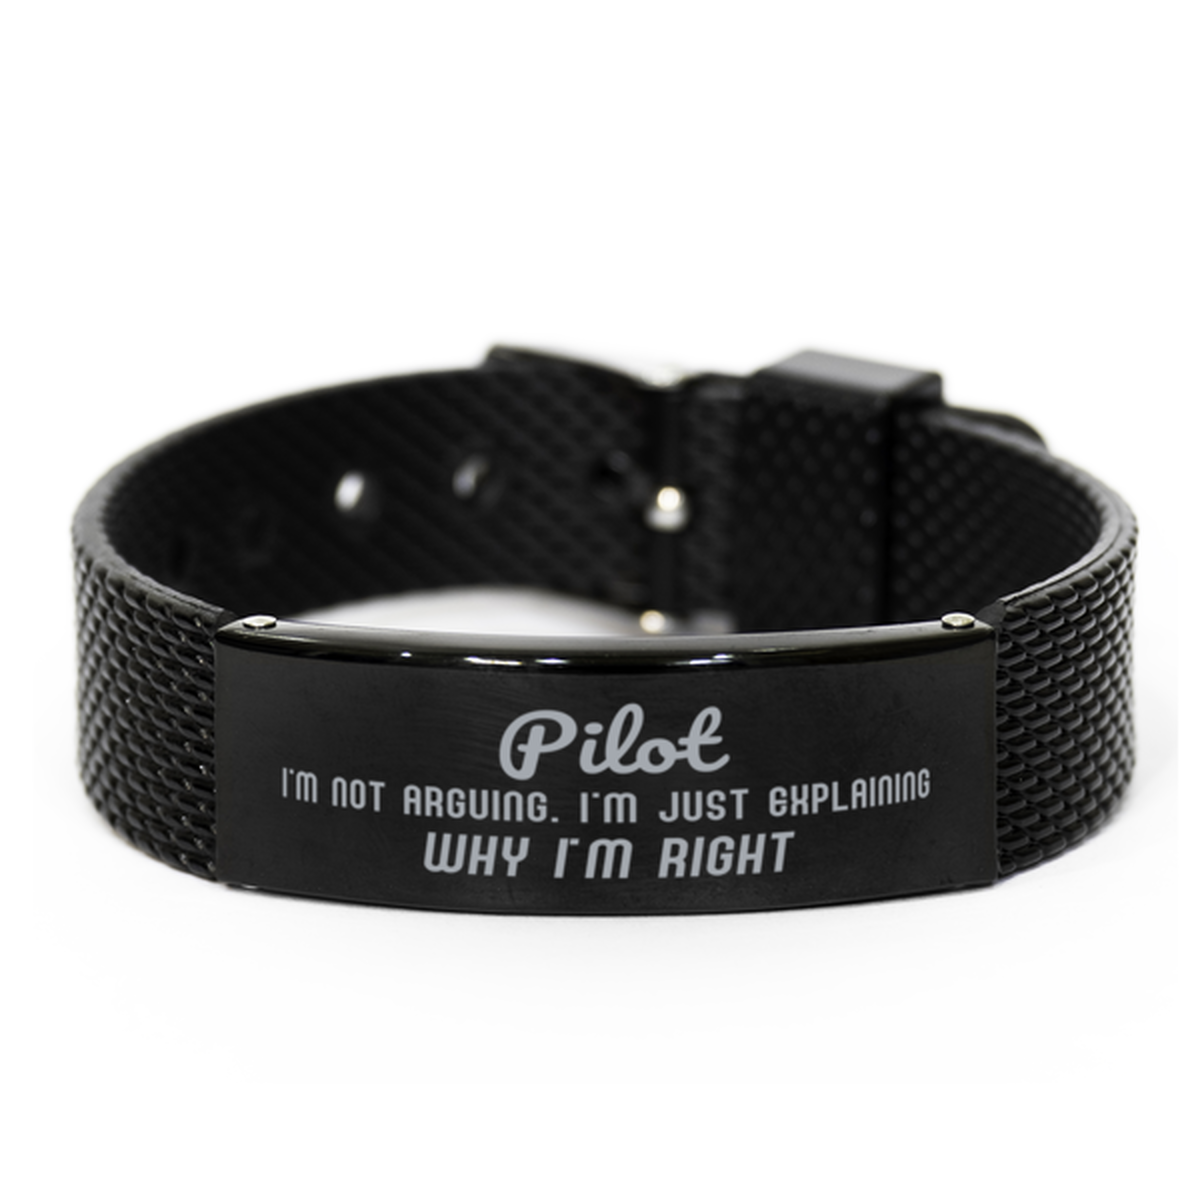 Pilot I'm not Arguing. I'm Just Explaining Why I'm RIGHT Black Shark Mesh Bracelet, Funny Saying Quote Pilot Gifts For Pilot Graduation Birthday Christmas Gifts for Men Women Coworker